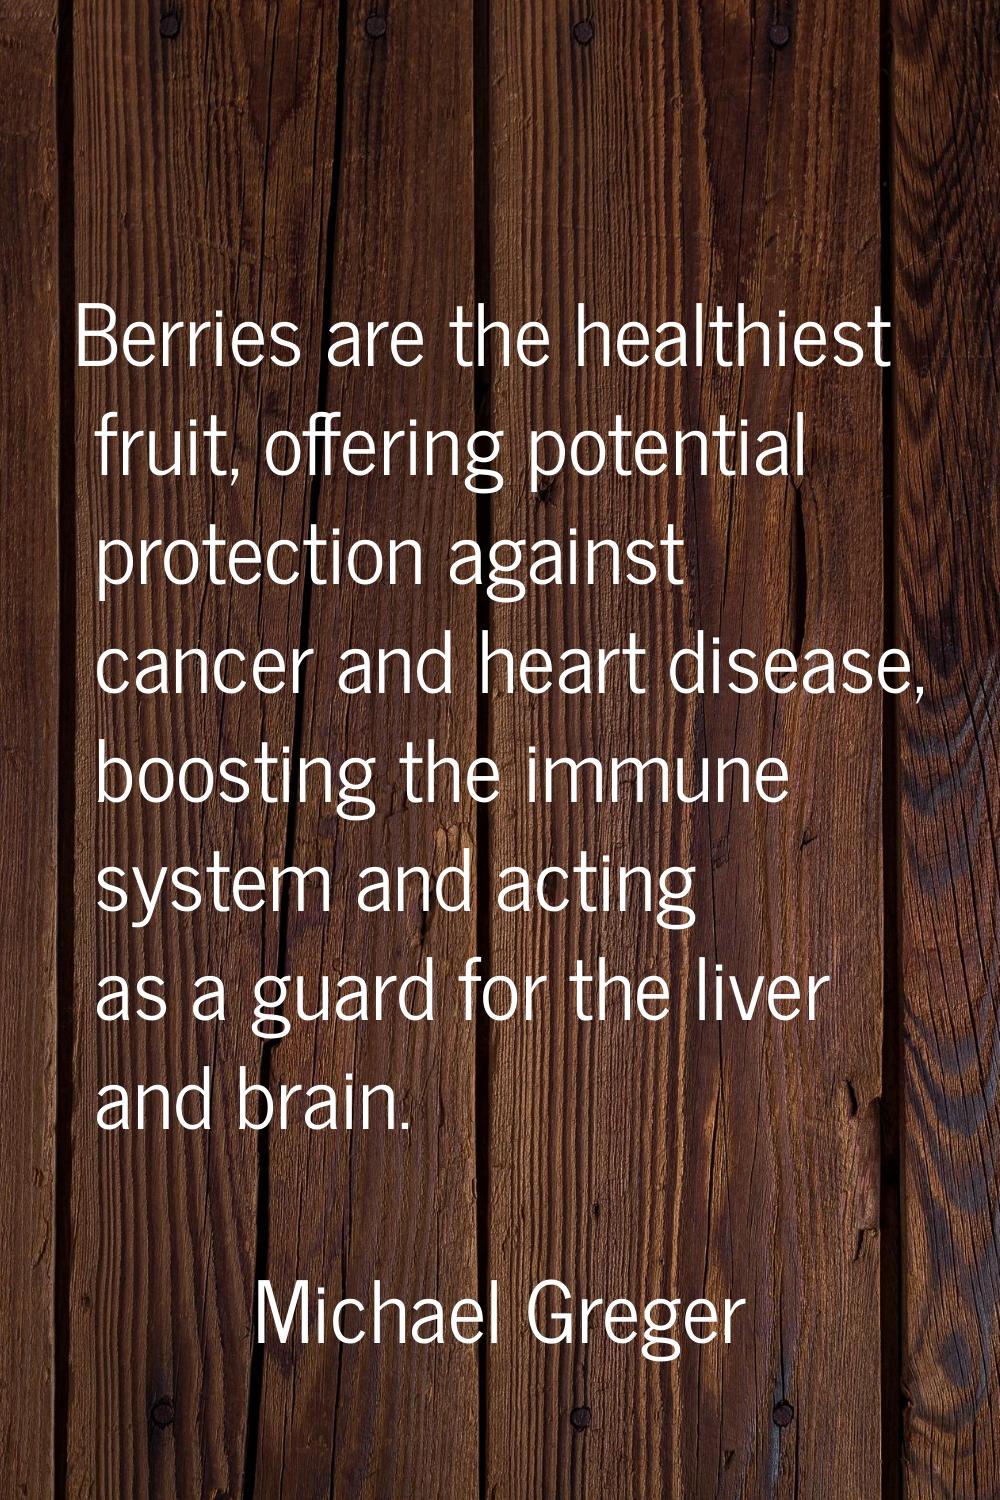 Berries are the healthiest fruit, offering potential protection against cancer and heart disease, b